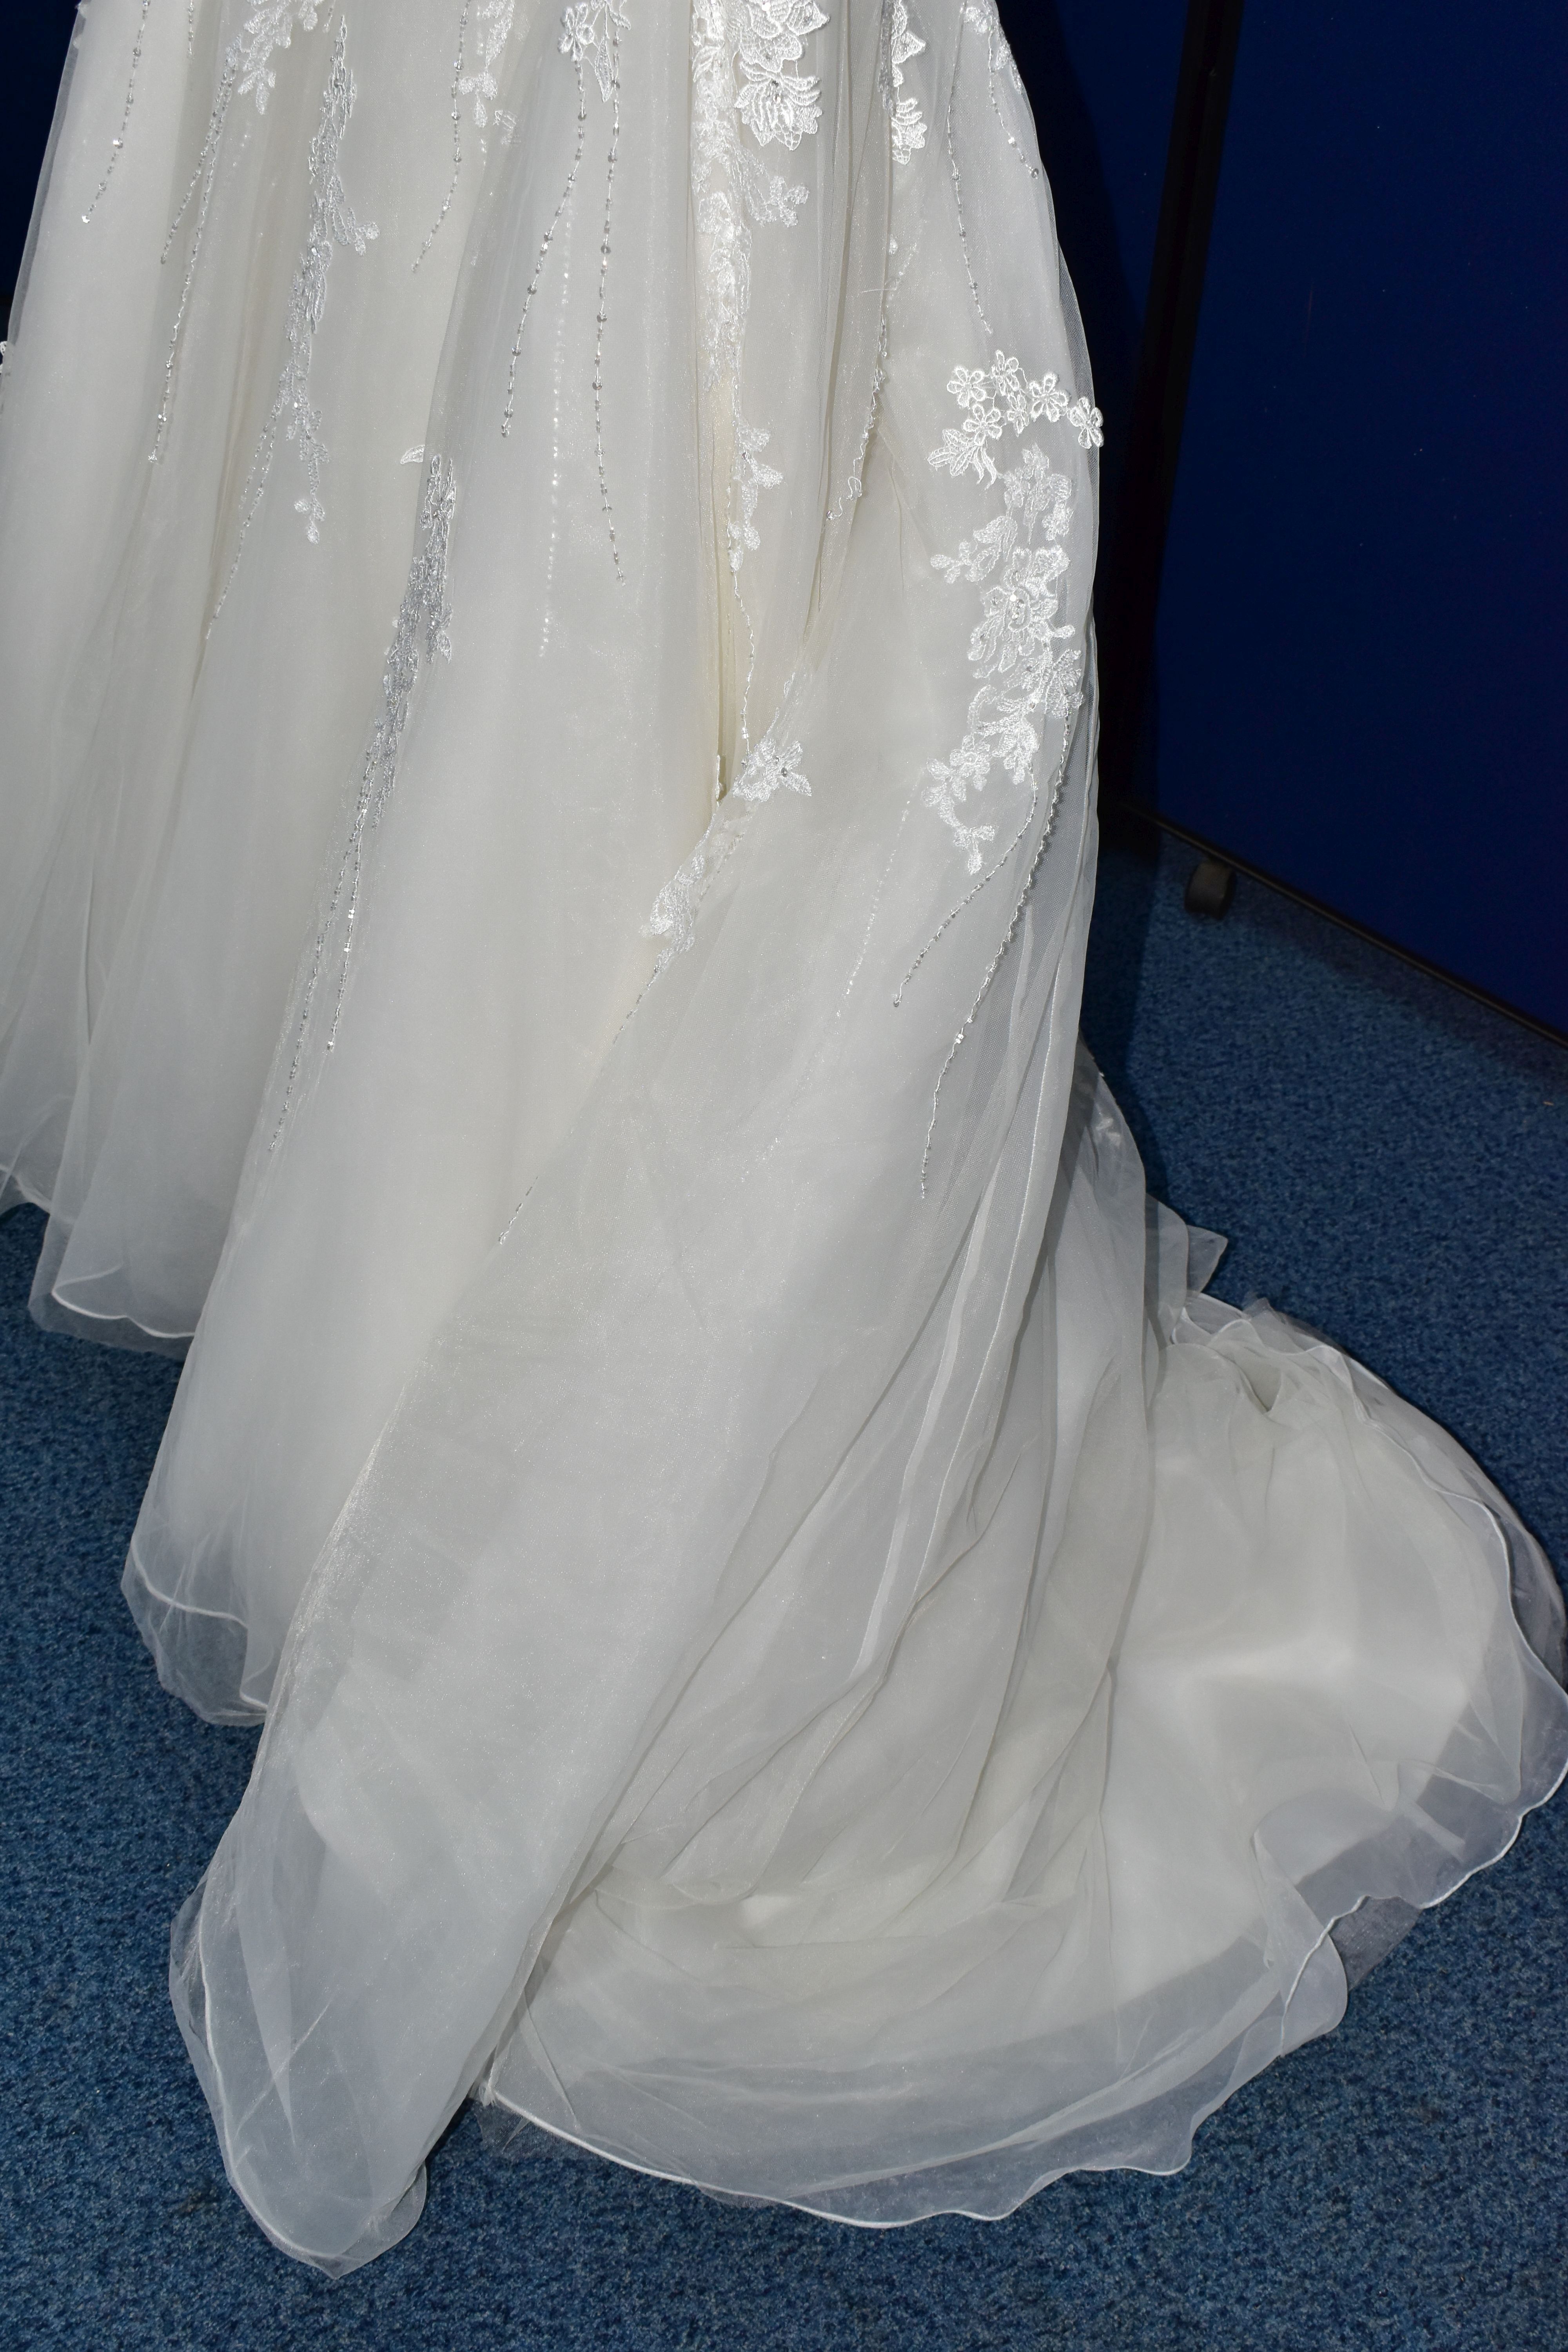 WEDDING DRESS, 'Sophia Tolli' ivory satin and tulle, very long train, off the shoulder, beaded - Image 6 of 12